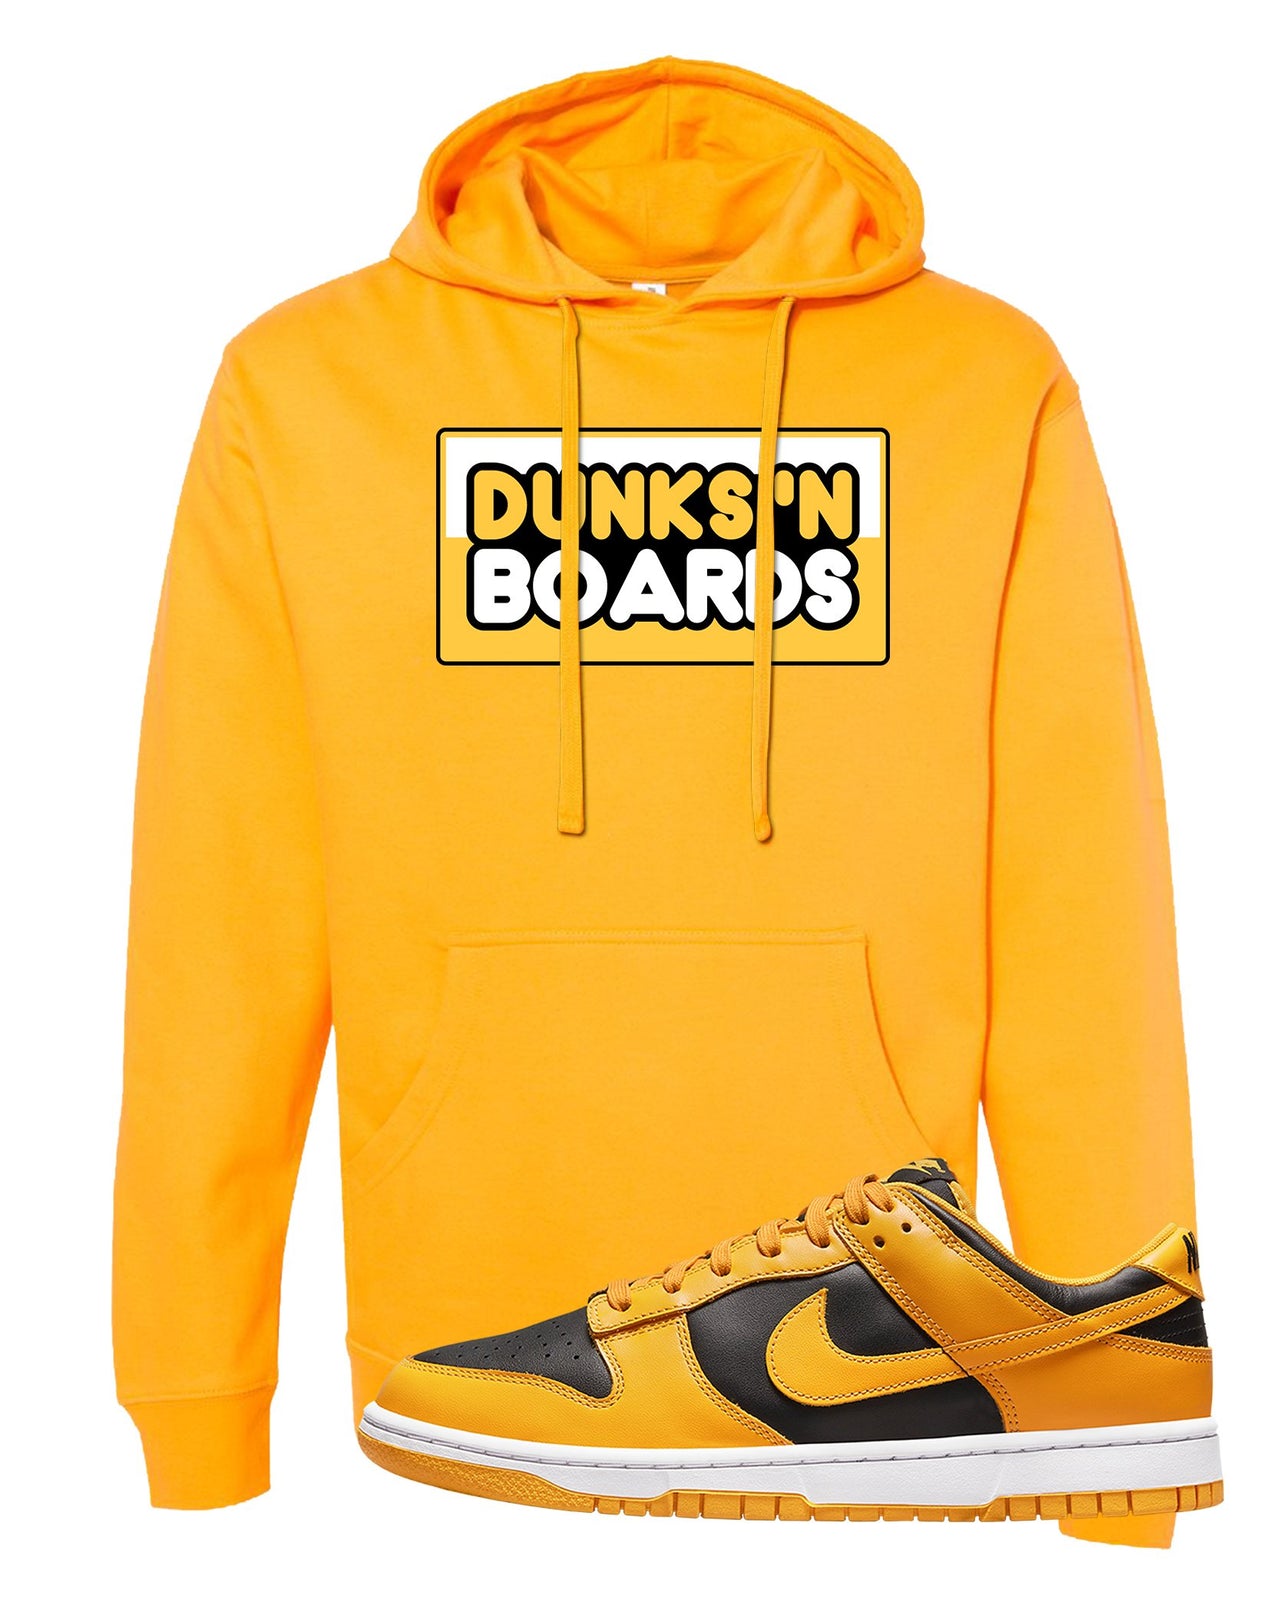 Goldenrod Low Dunks Hoodie | Dunks N Boards, Gold